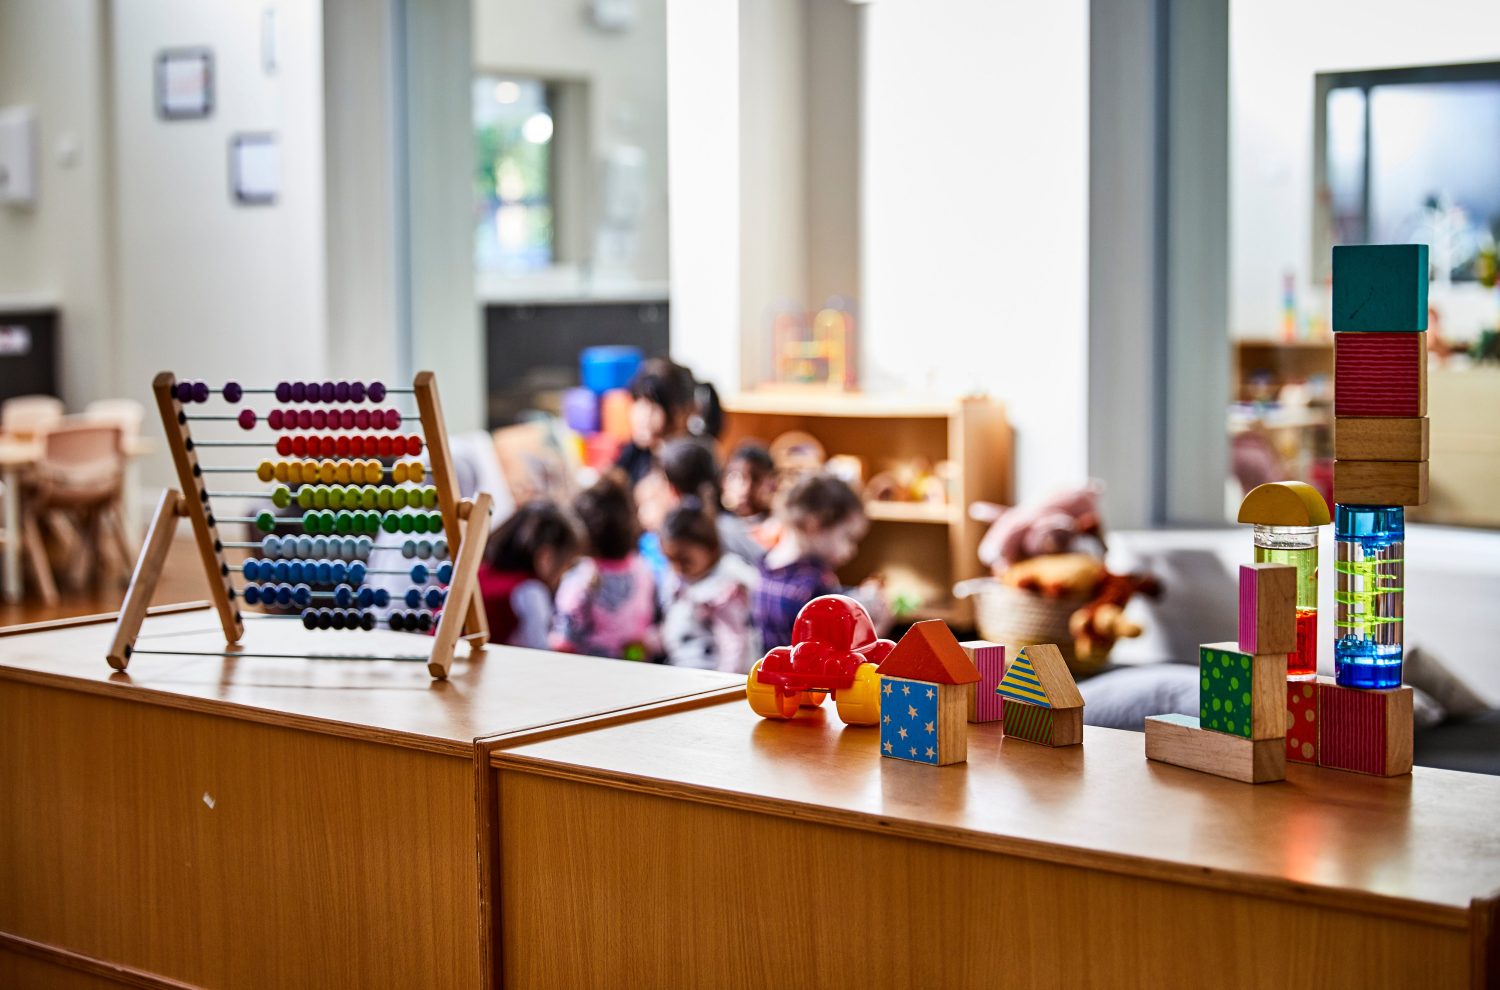 Interior photography detail of toys and educational equipment in a childcare center with preschoolers out of focus in the background